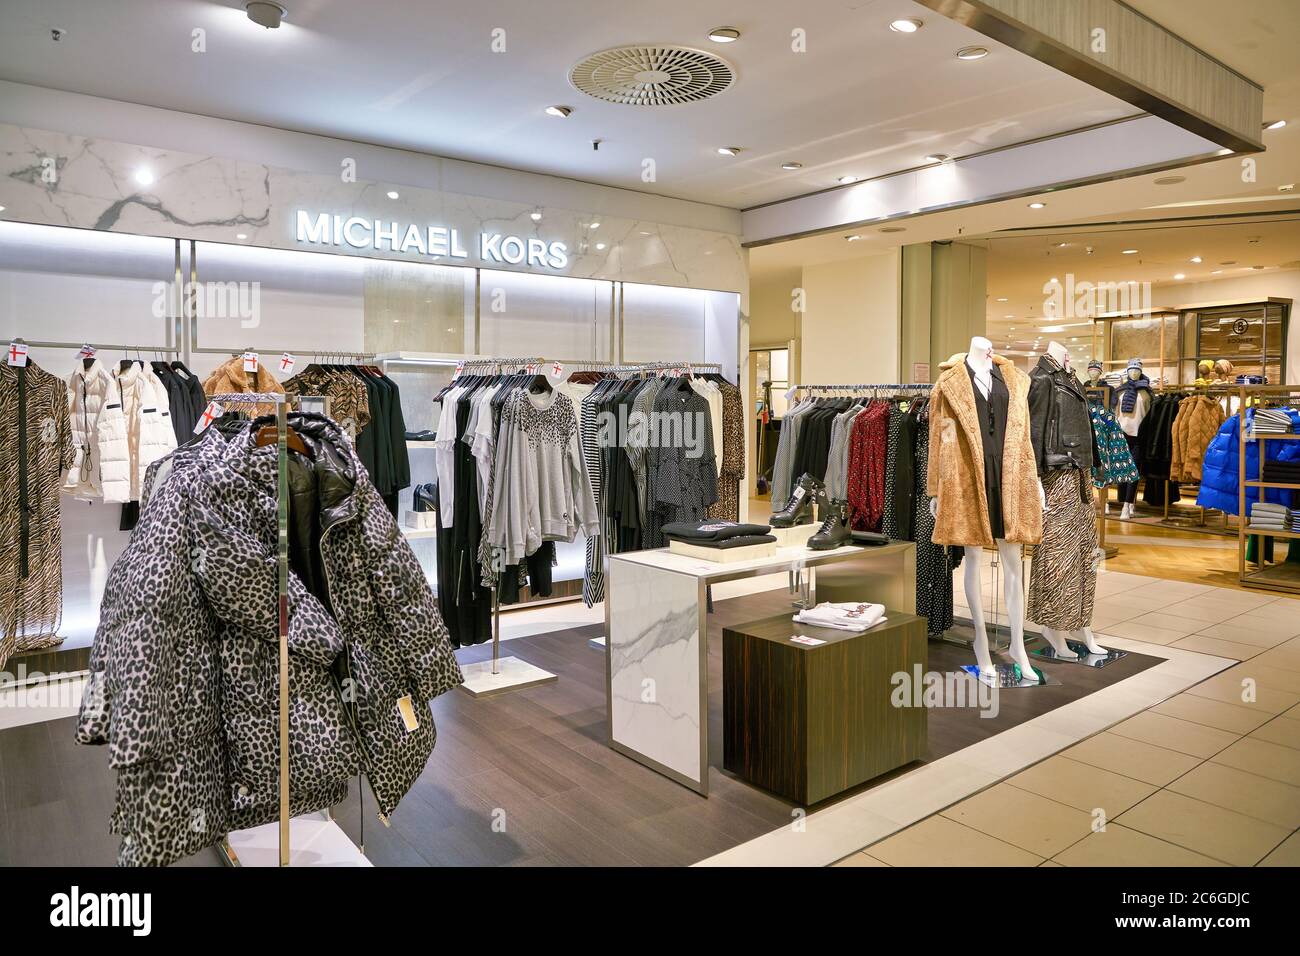 BERLIN, GERMANY - CIRCA SEPTEMBER, 2019: Michael Kors clothes on display at  the Kaufhaus des Westens (KaDeWe) department store in Berlin Stock Photo -  Alamy